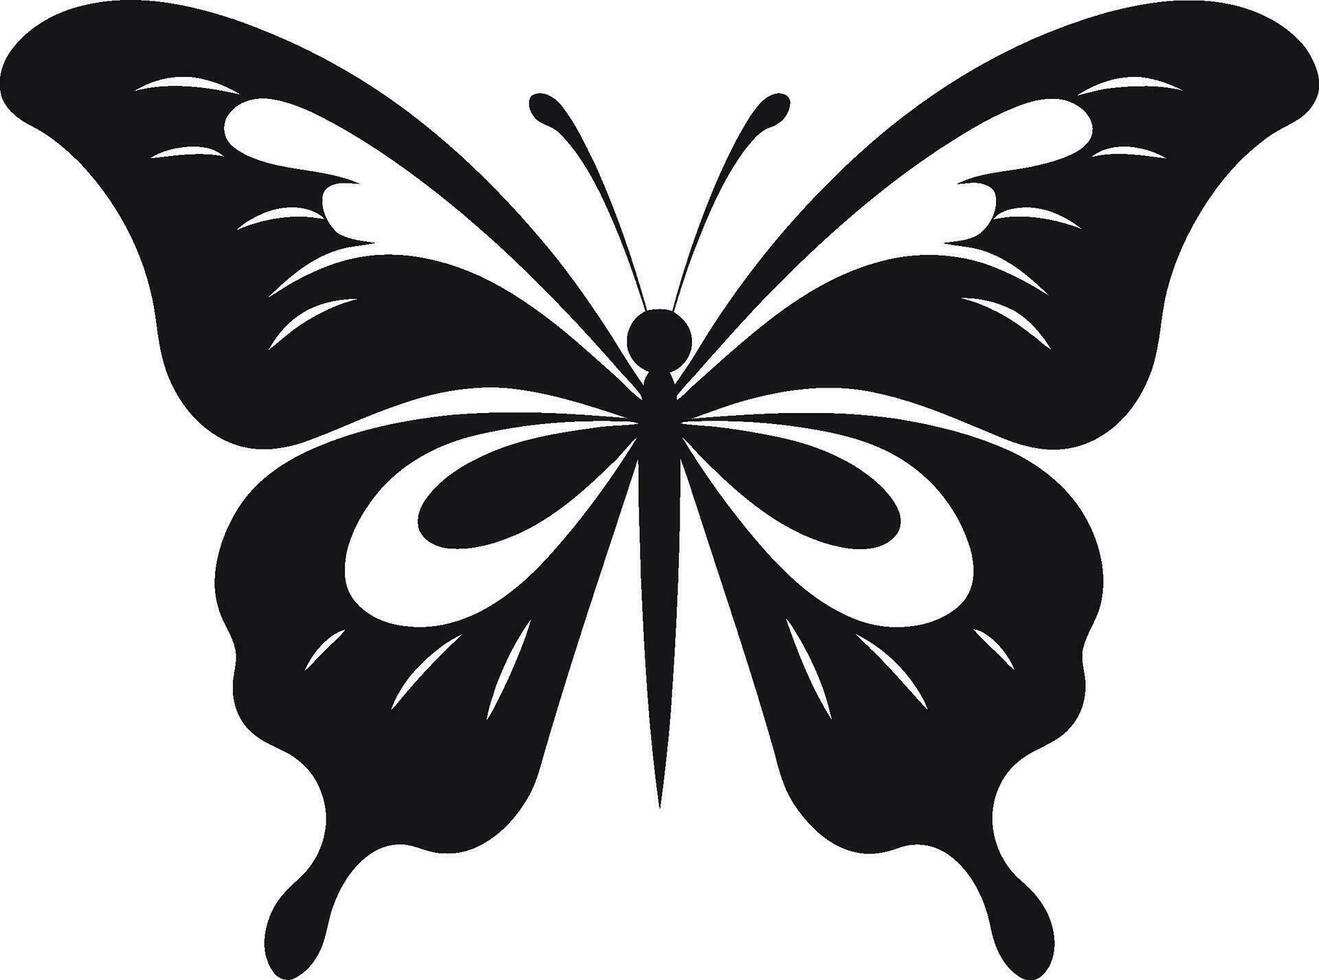 Sleek and Stylish Black Butterfly Design Winged Delight Black Butterfly Icon in Black vector